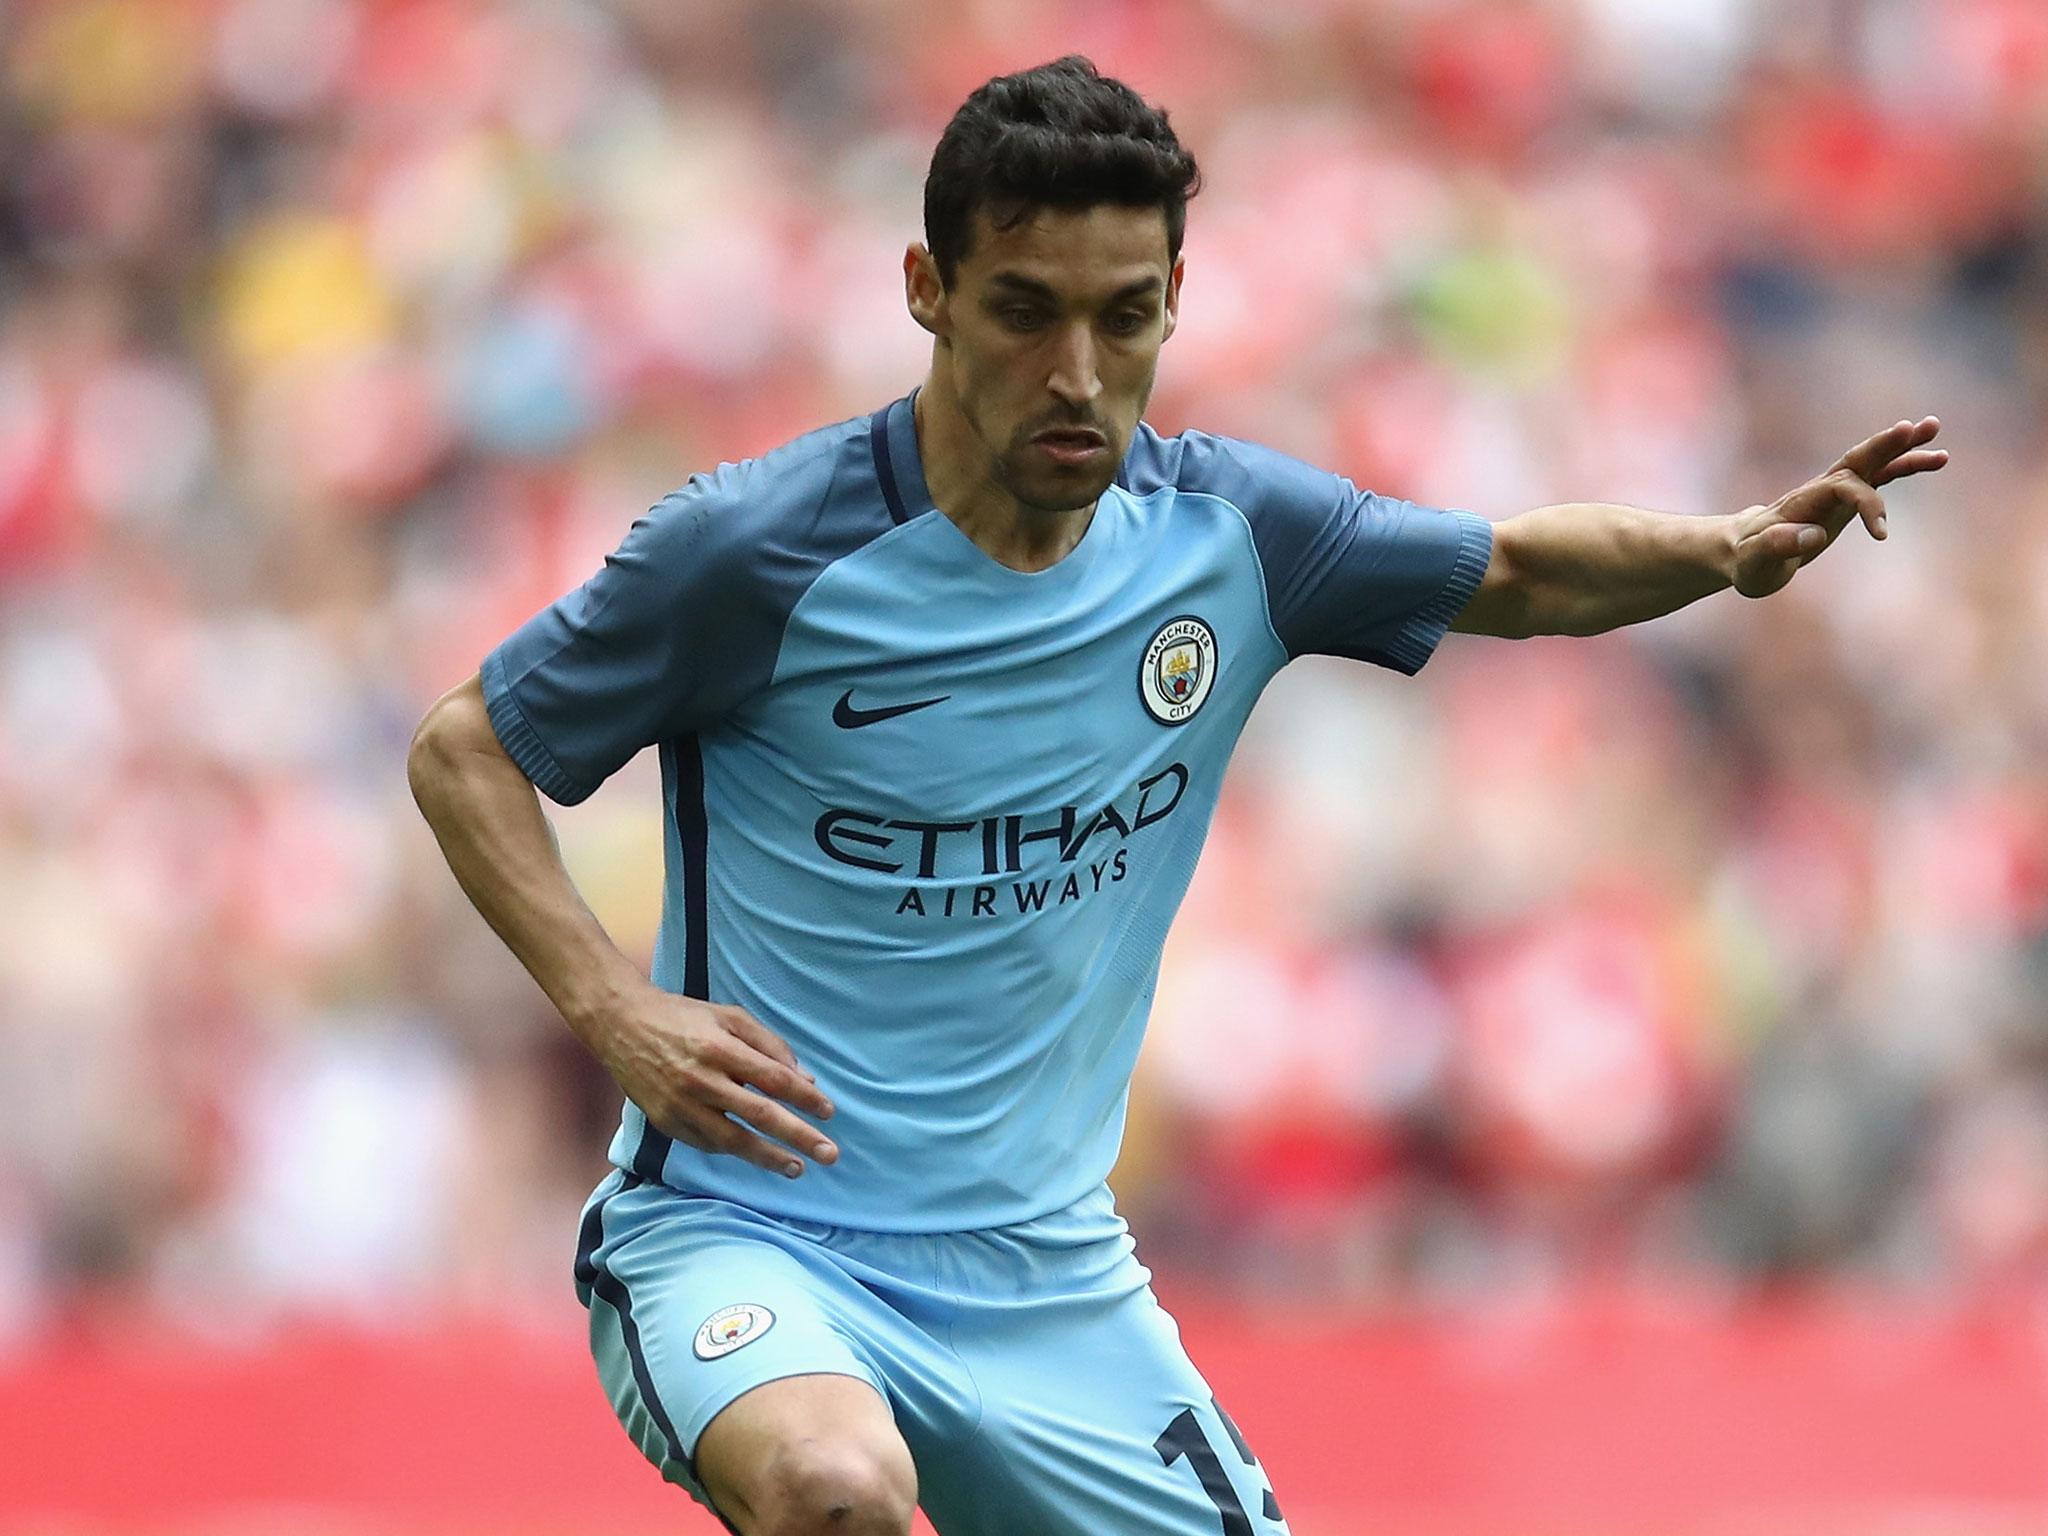 Jesus Navas will leave the club when his contract expires in June